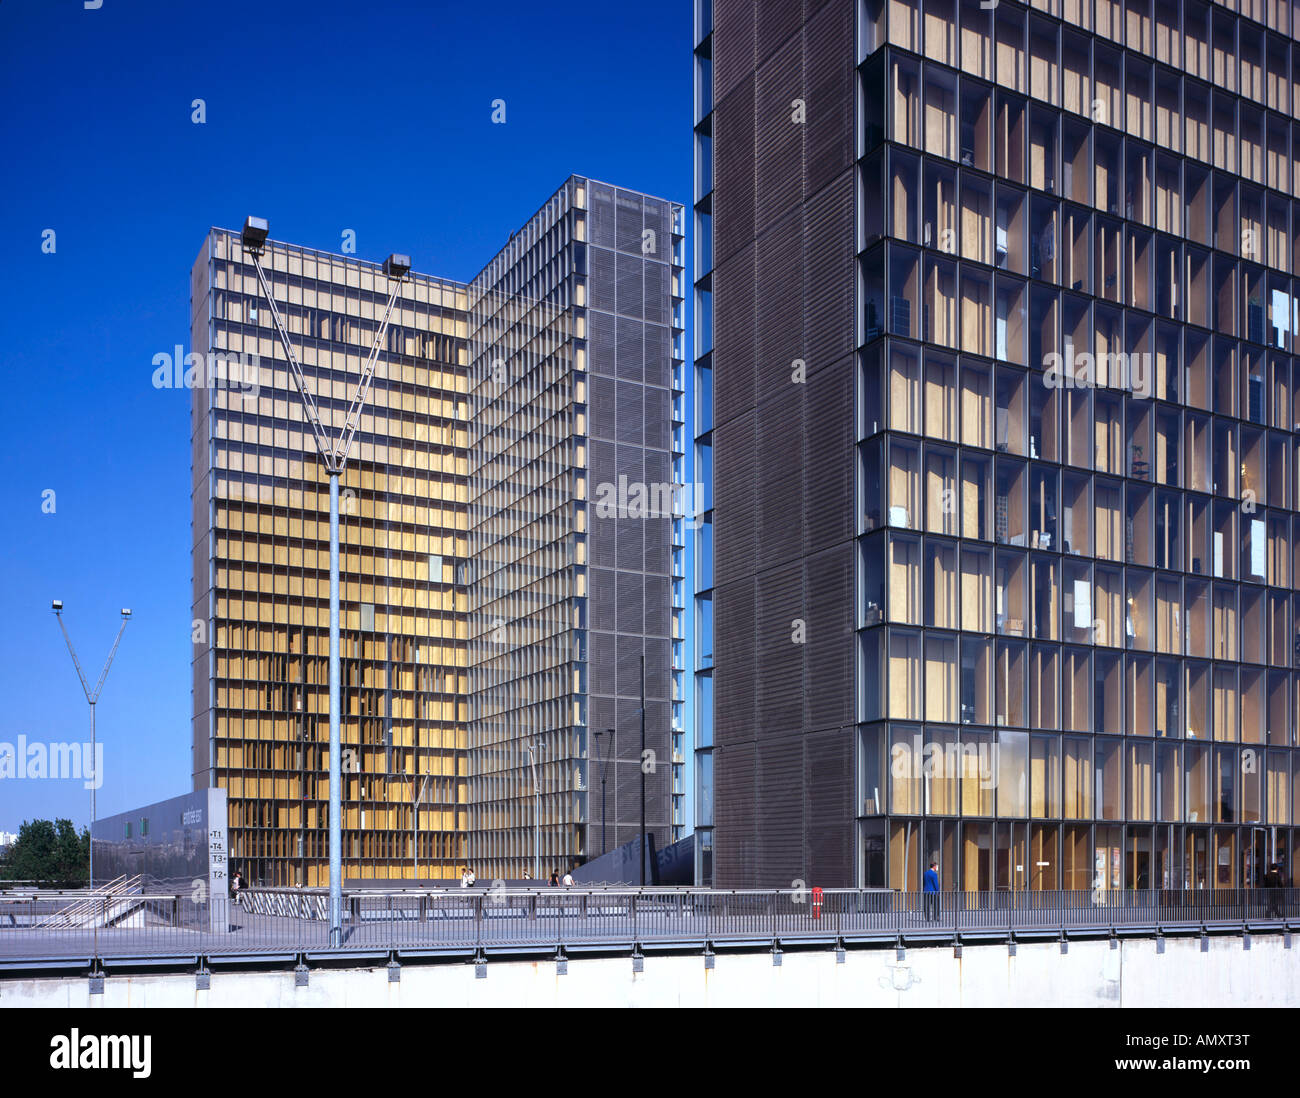 Library near metro station, Bibliotheque National De France, Bibliotheque  Francois Mitterrand, Paris, France Stock Photo - Alamy